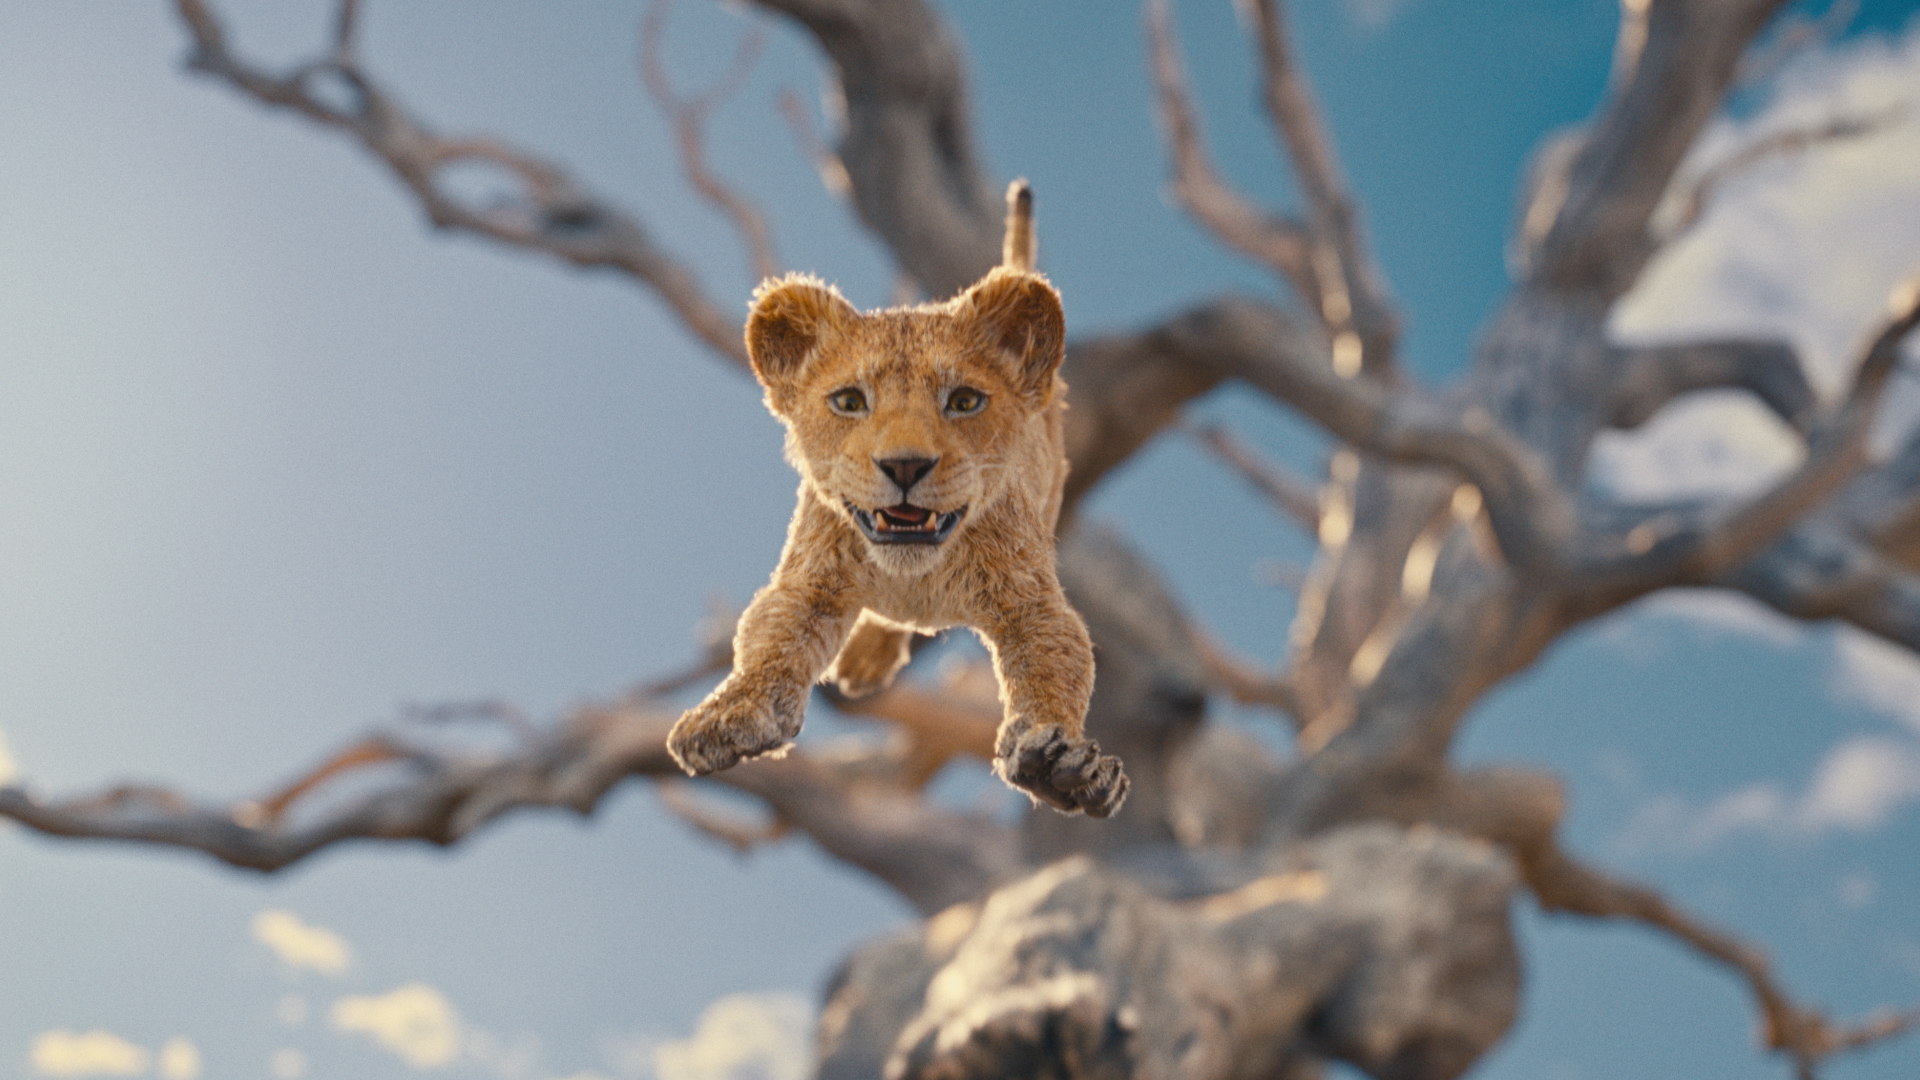  The Lion King' Teaser Trailer Arrives, X Users React